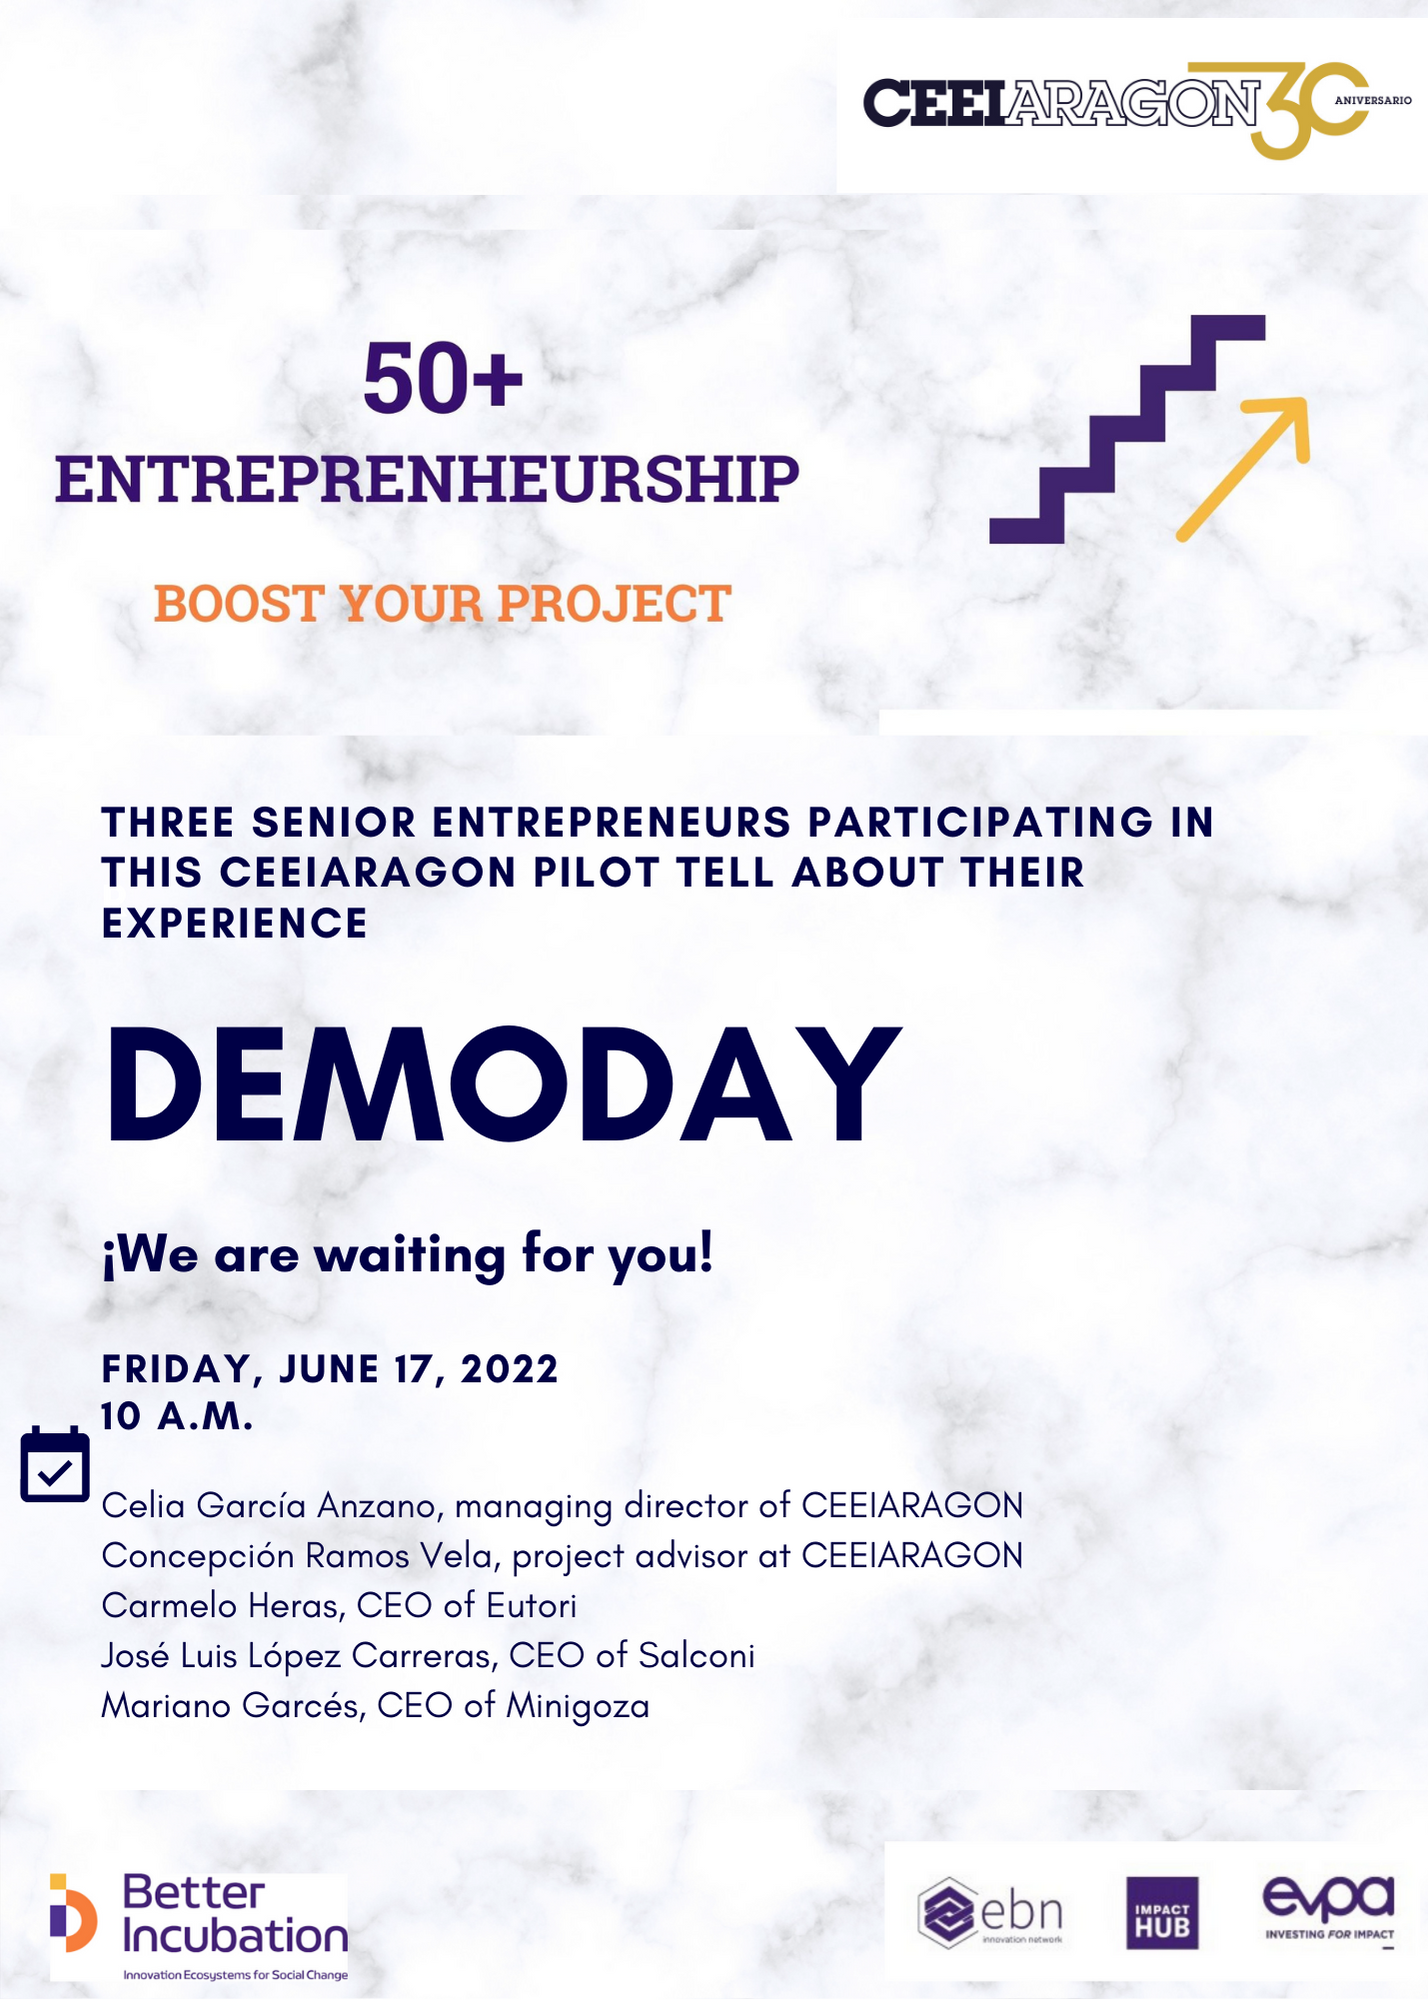 DemoDay 50+ Entrepreneurship, boost your project: “three senior entrepreneurs participating in this CEEIARAGON pilot tell their experience”